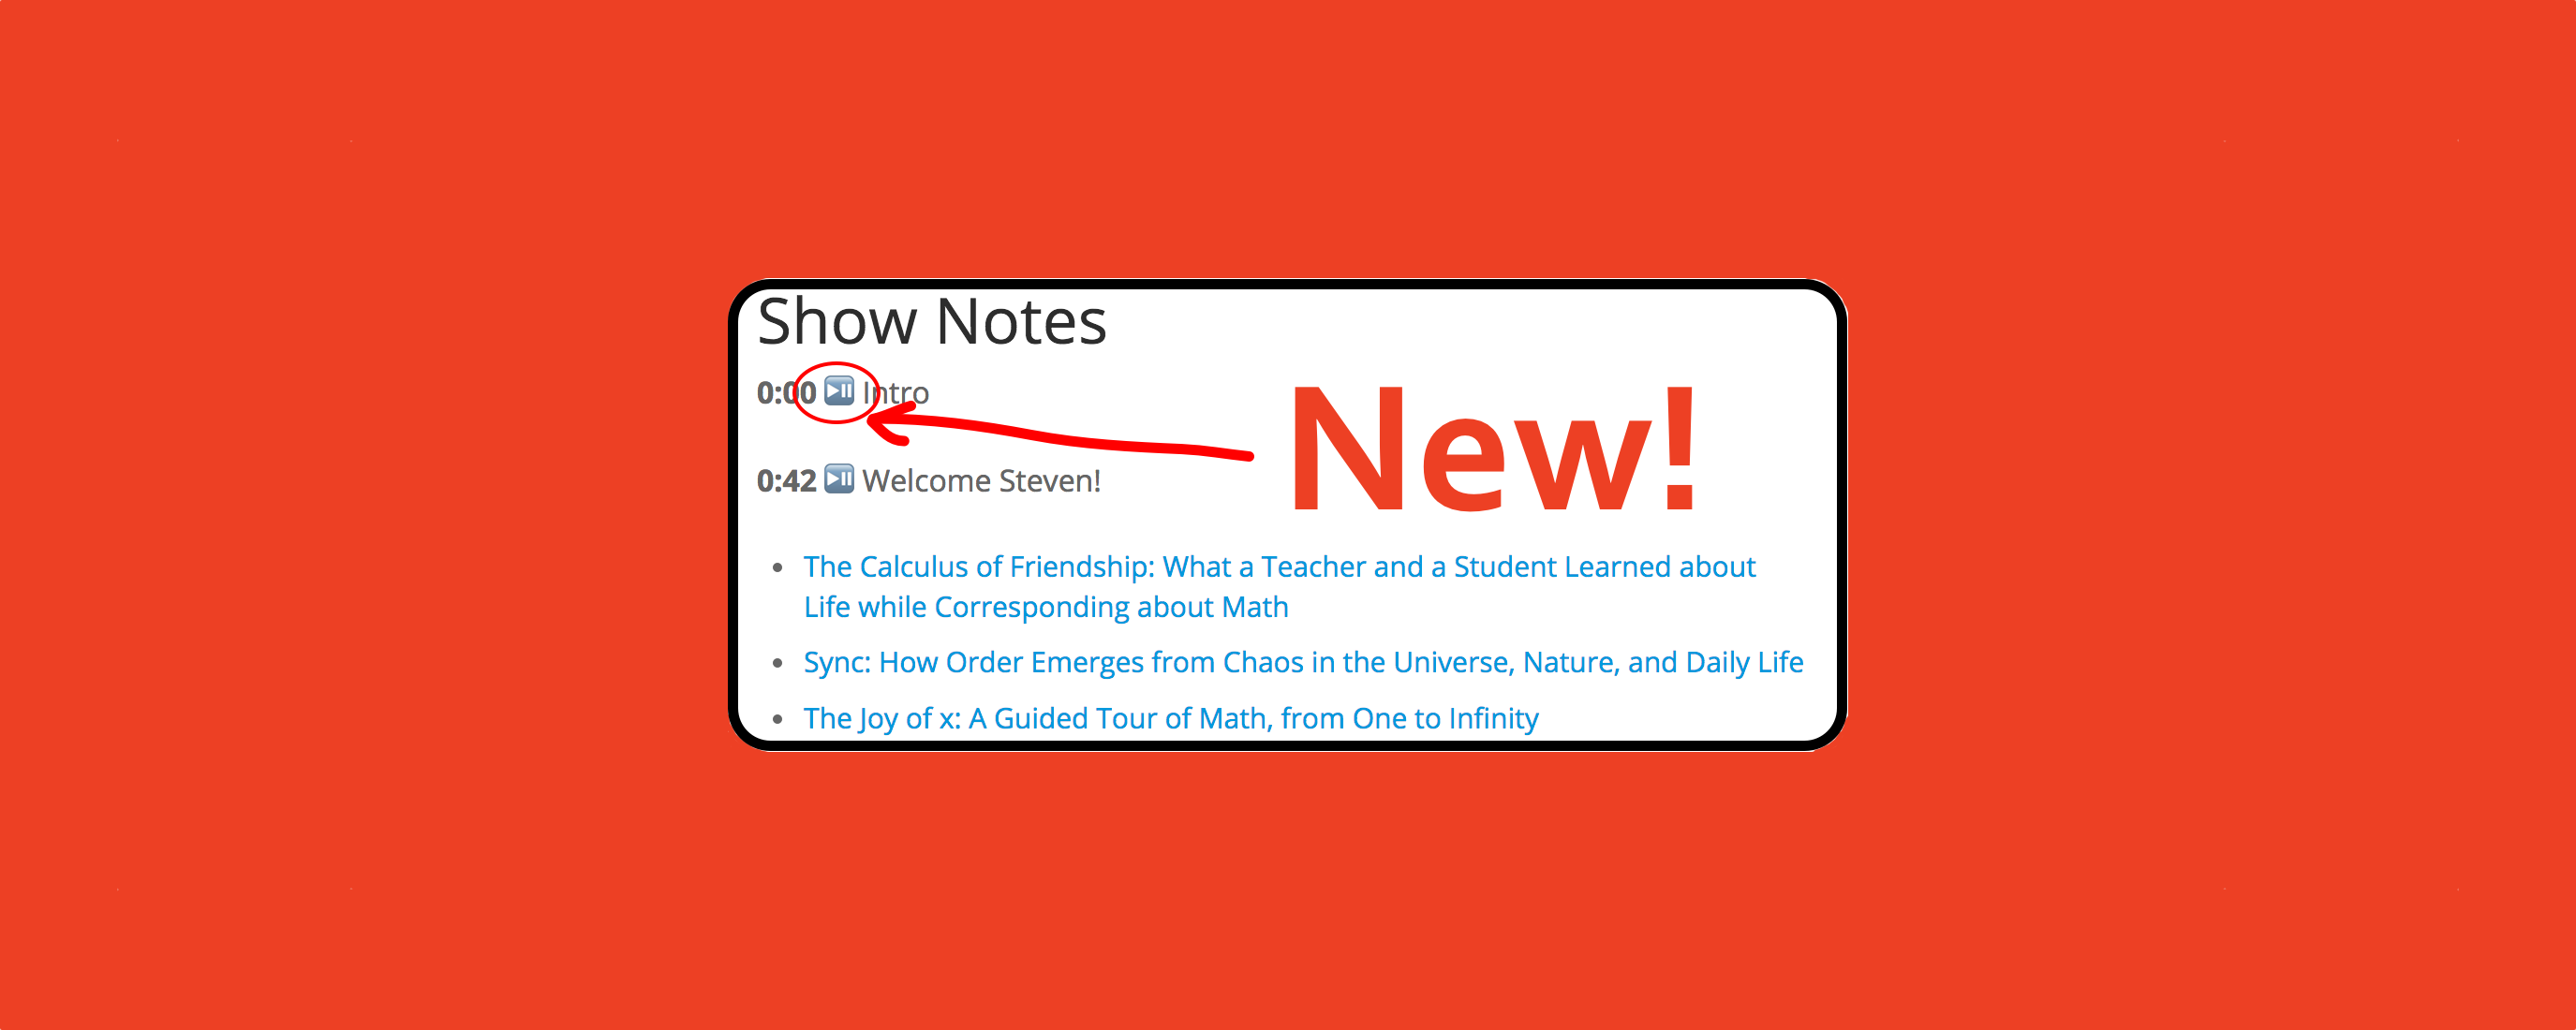 Playable Show Notes
                               